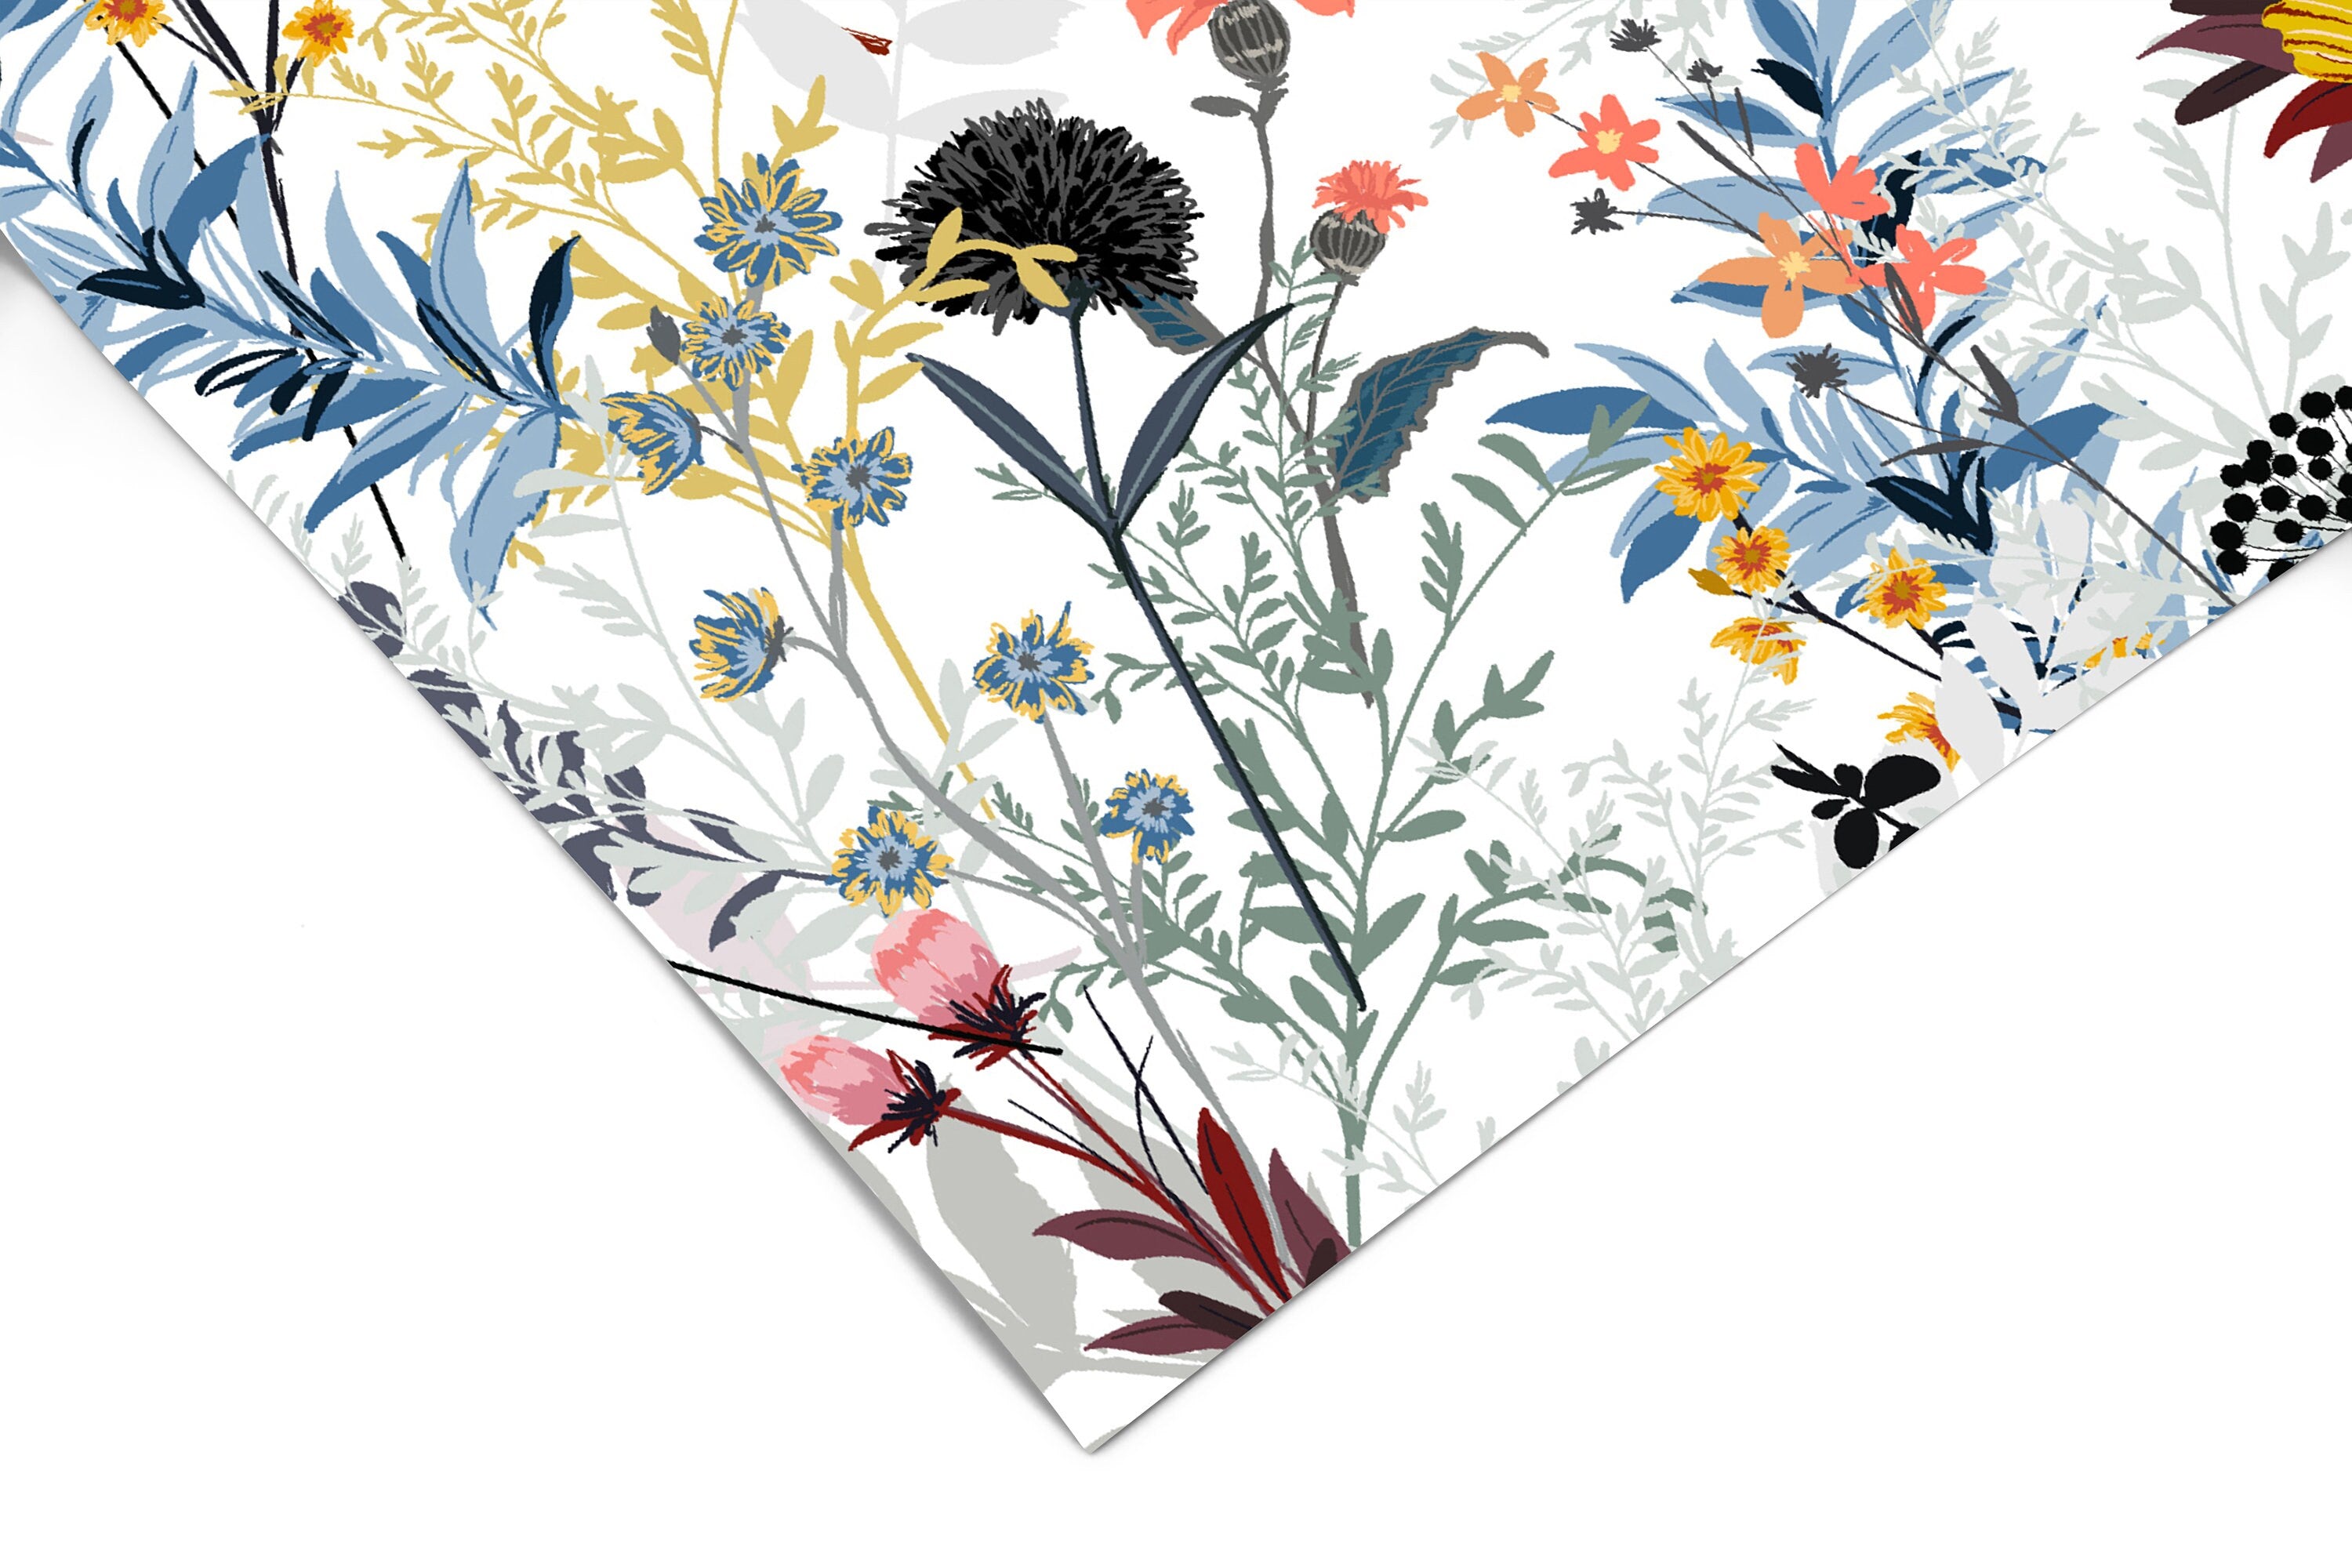 Wallpaper Peel and Stick Wallpaper Colorful Wildflower Floral Removable Wallpaper Wall Decor Home Decor Wall Art Room Decor 3778 - JamesAndColors